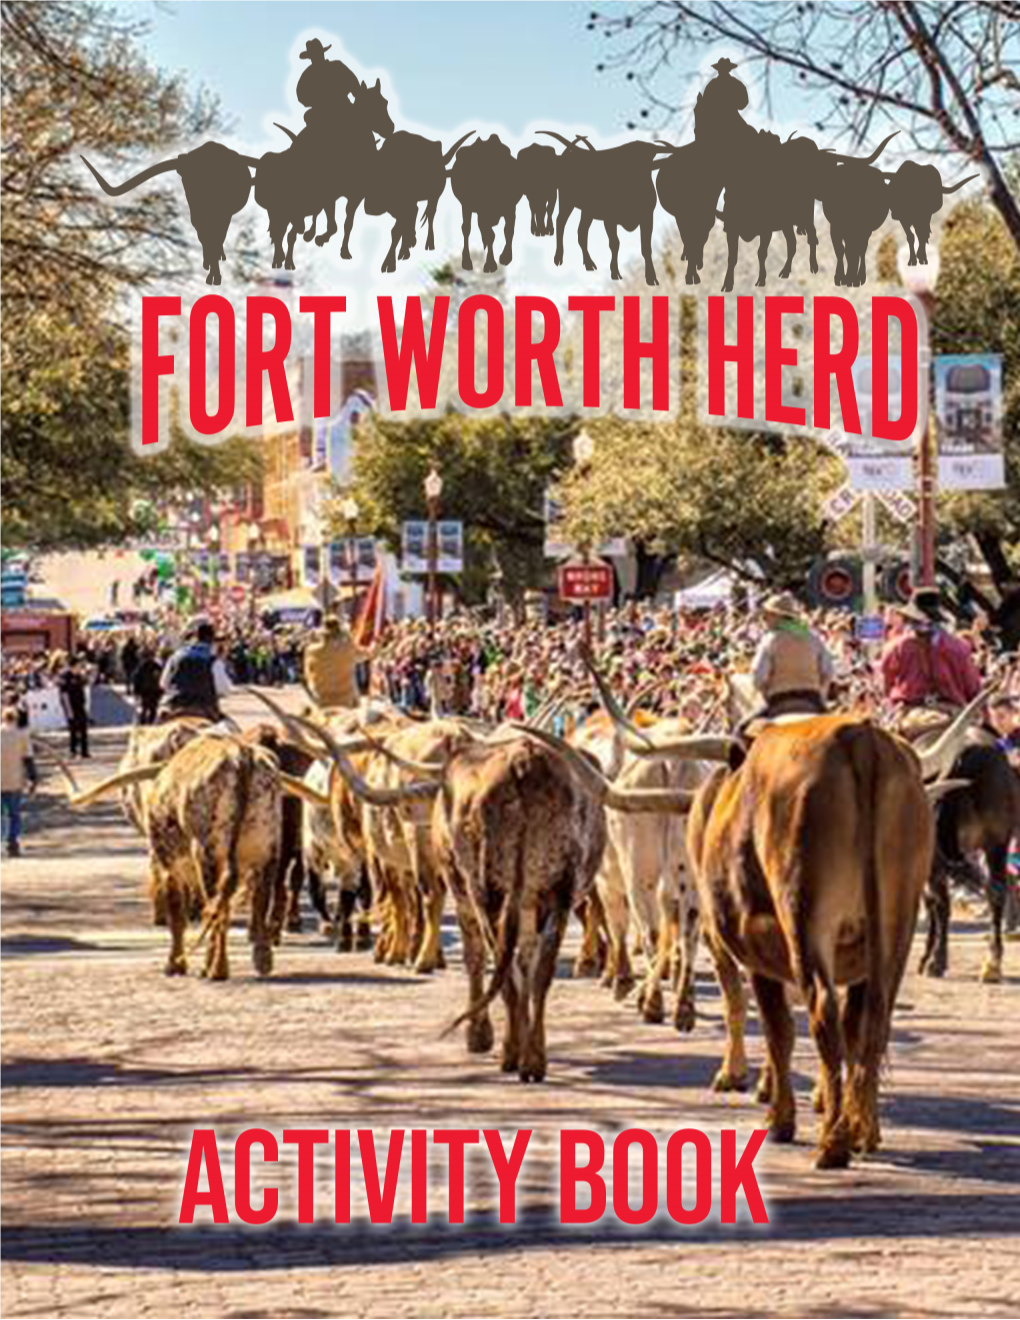 About the Fort Worth Herd